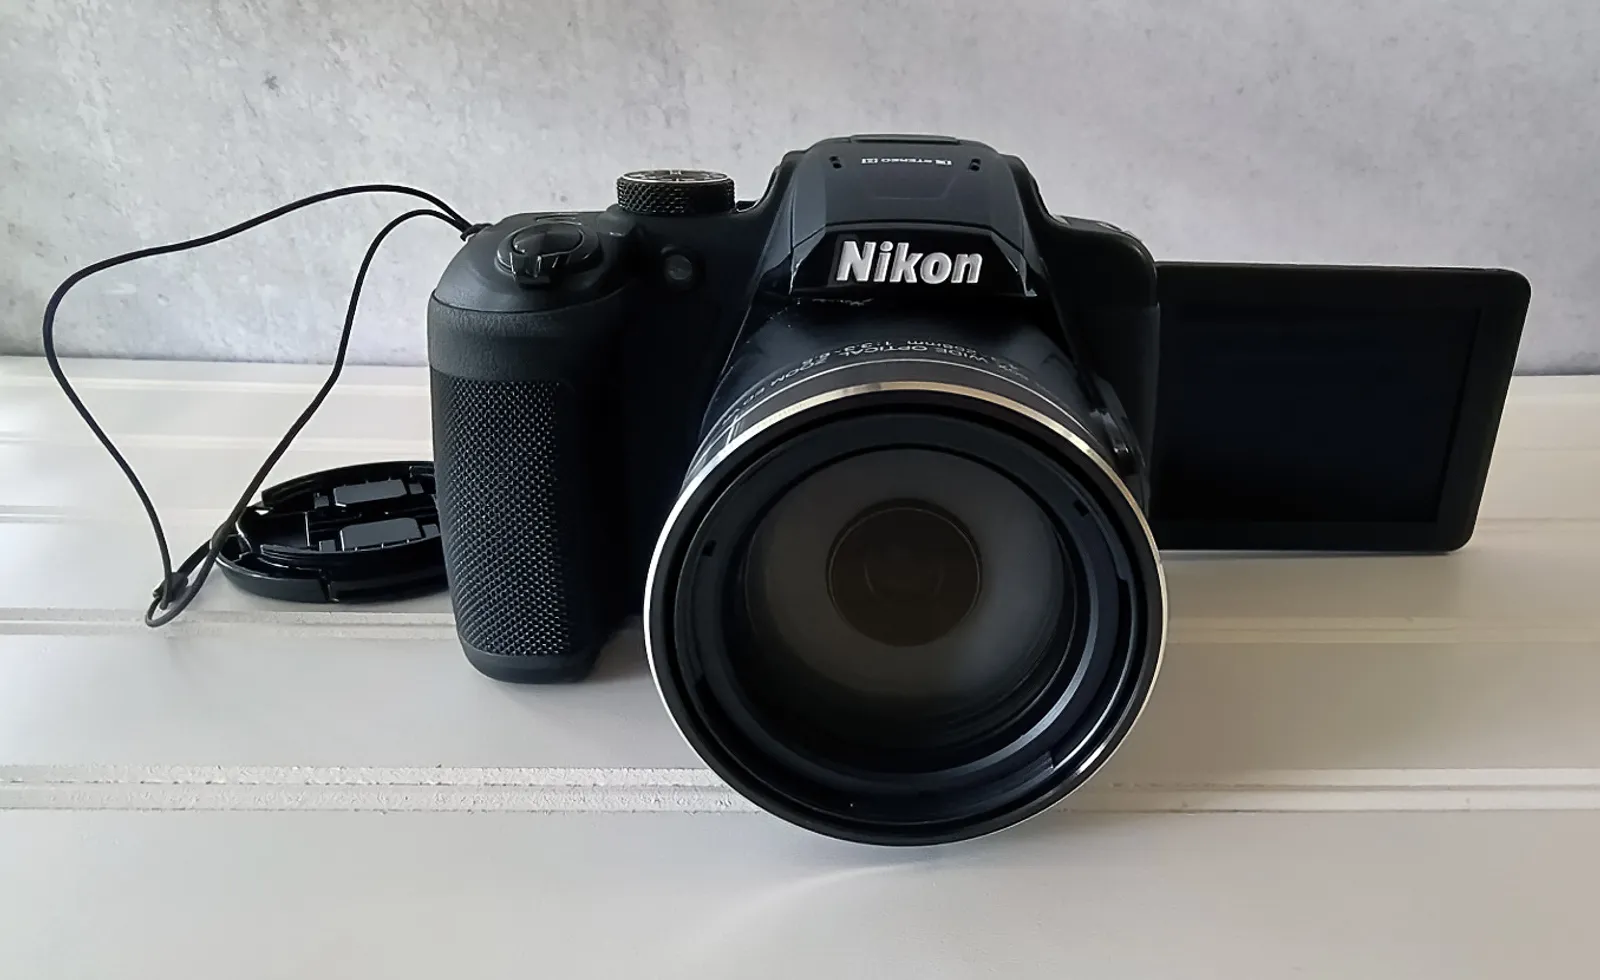 Nikon Coolpix B700 From KCP Gear Shop On Gear Focus